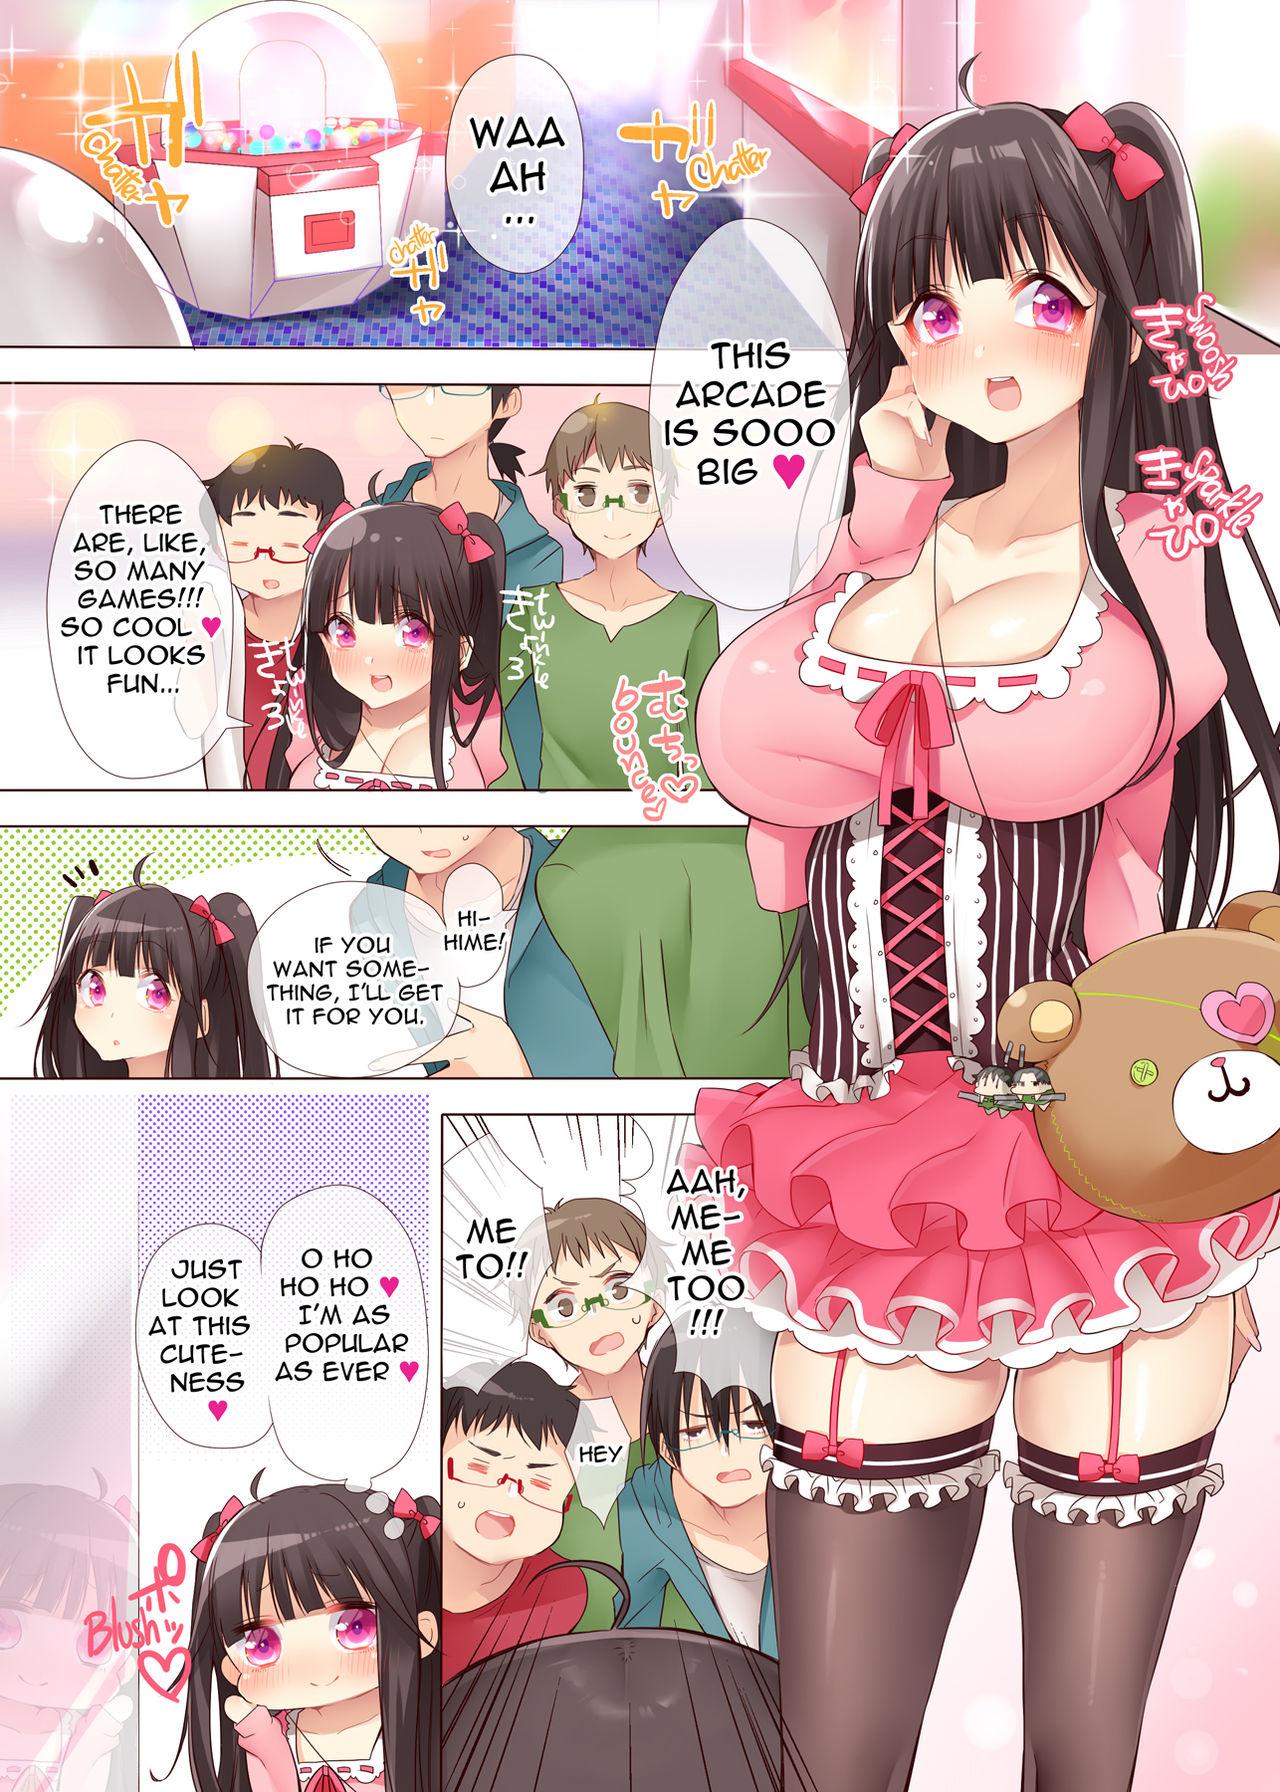 Amatur Porn The Princess of an Otaku Group Got Knocked Up by Some Piece of Trash So She Let an Otaku Guy Do Her Too!? Asstomouth - Page 2